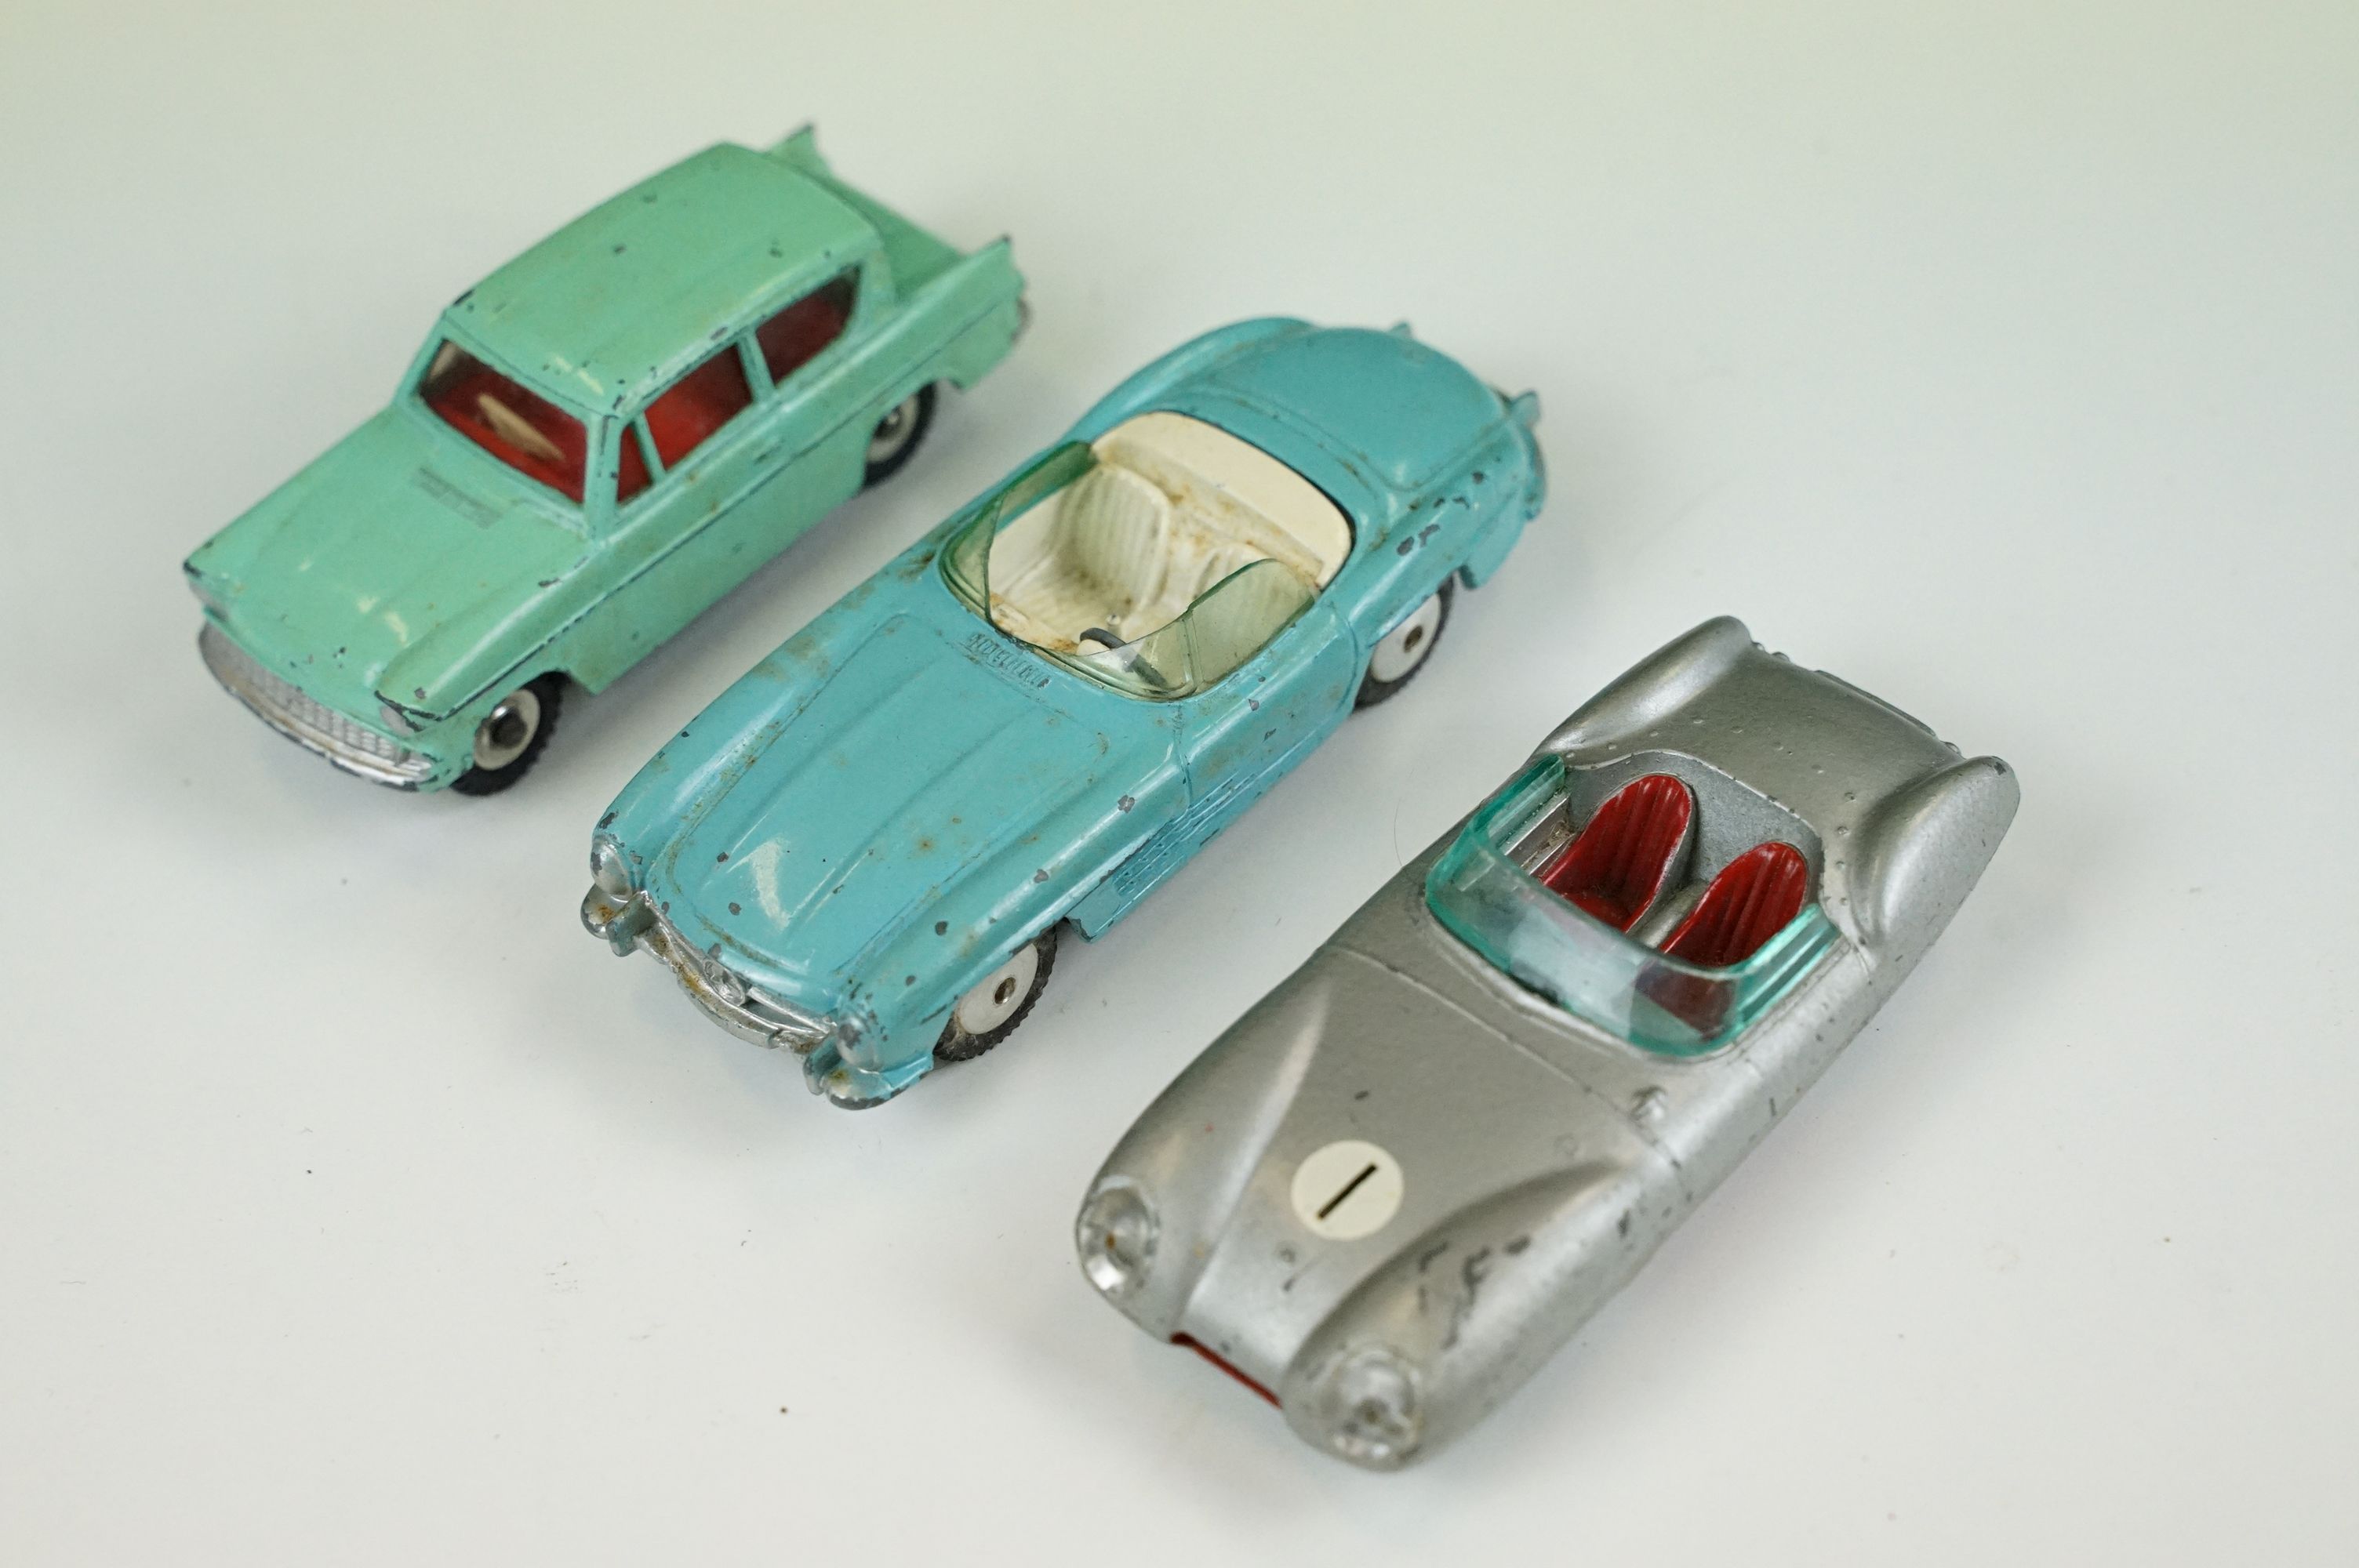 35 Mid 20th C play worn diecast models to include Dinky, Triang & Corgi examples, featuring Triang - Image 10 of 13